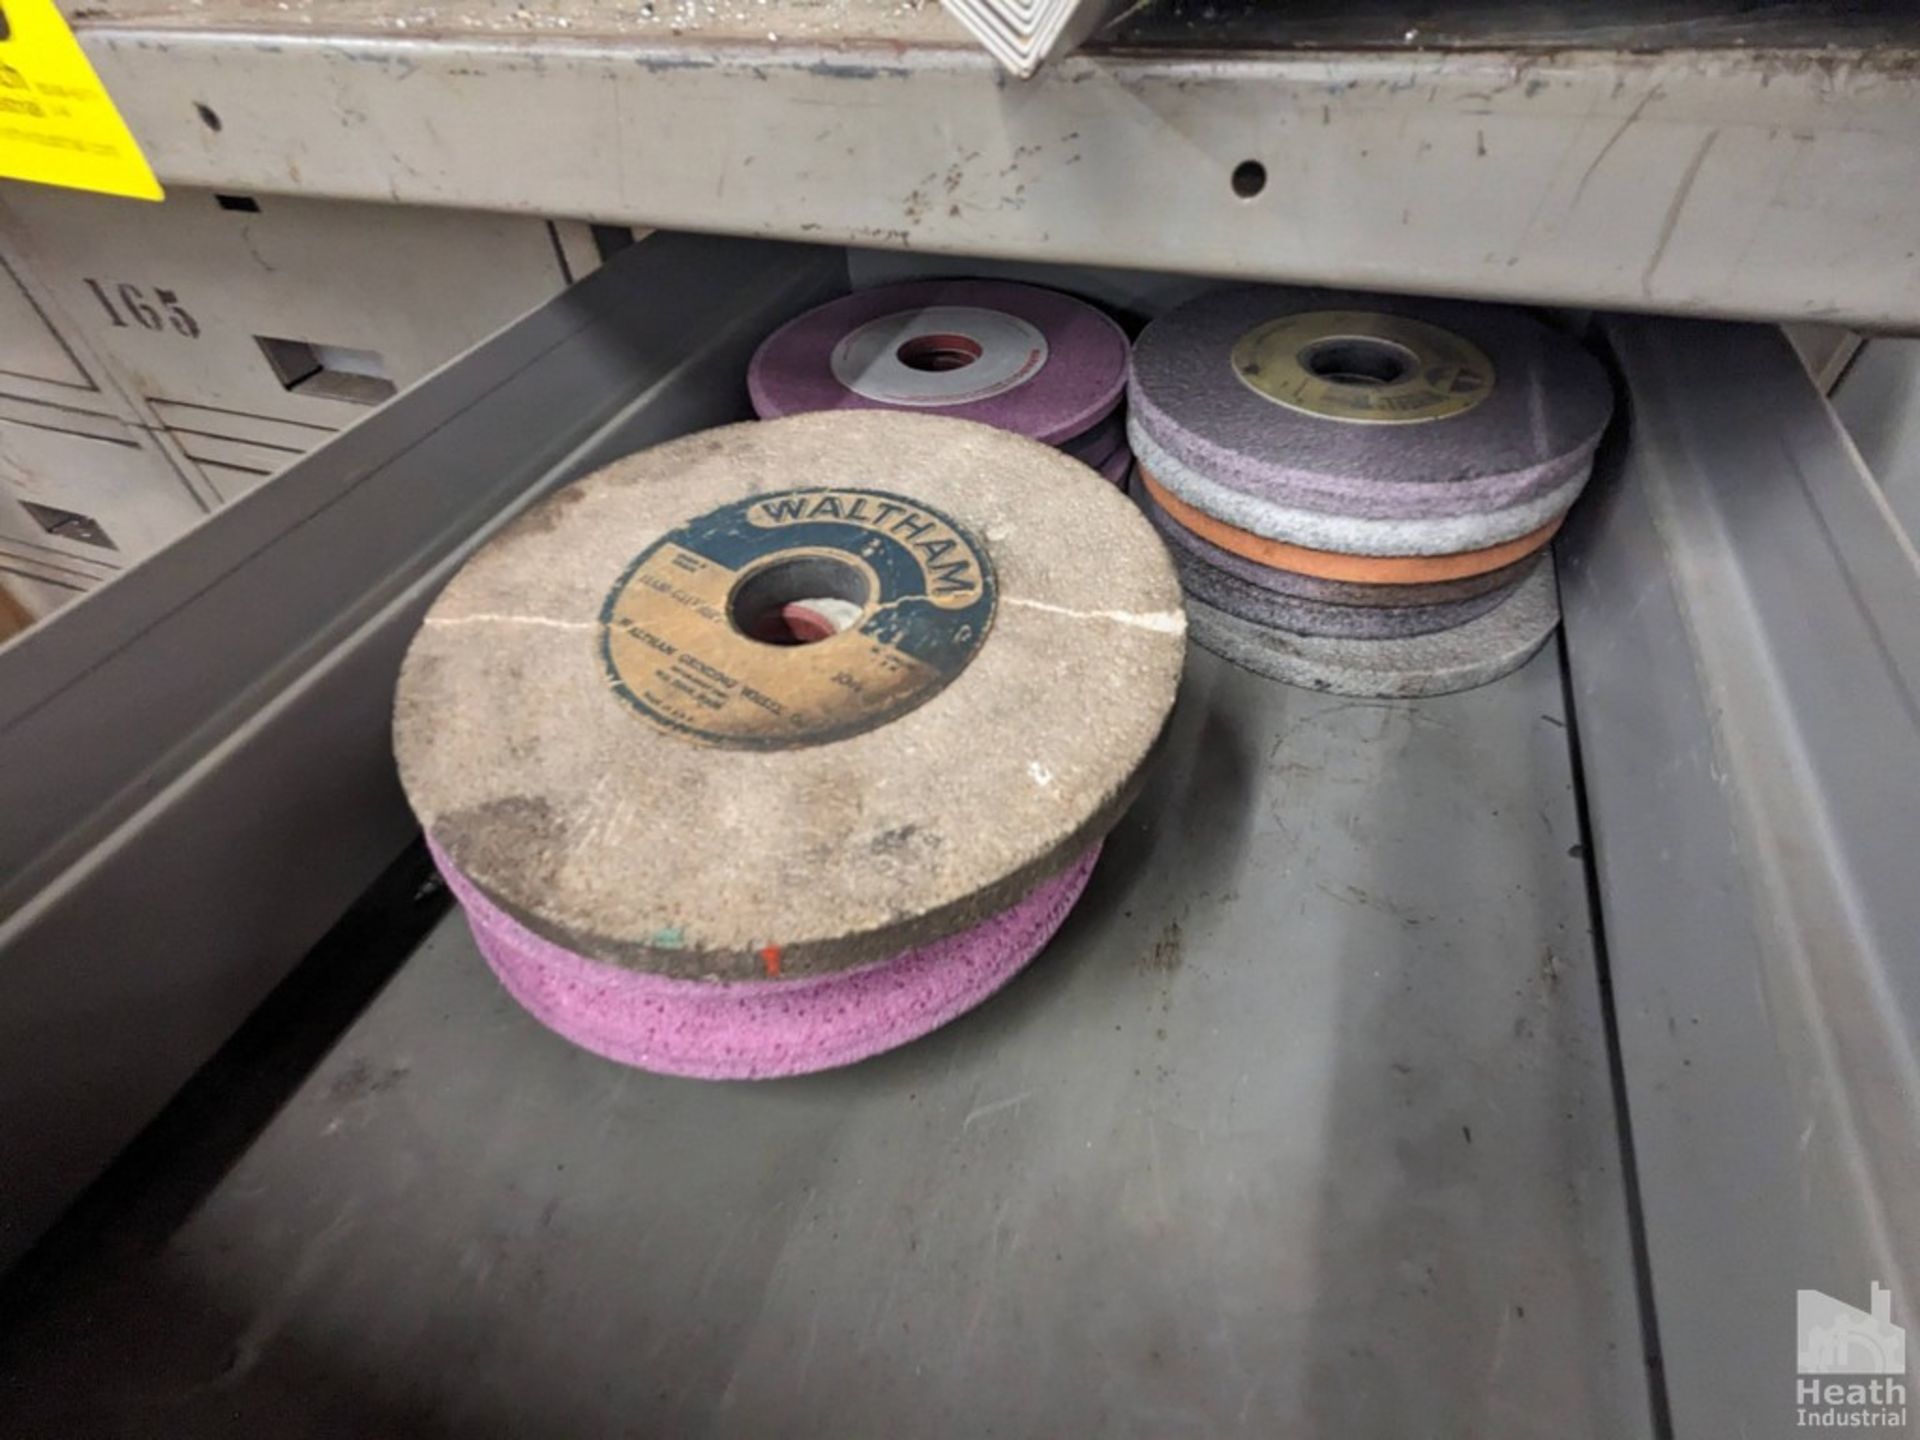 ASSORTED GRINDING WHEELS IN DRAWERS Loading Fee :$100